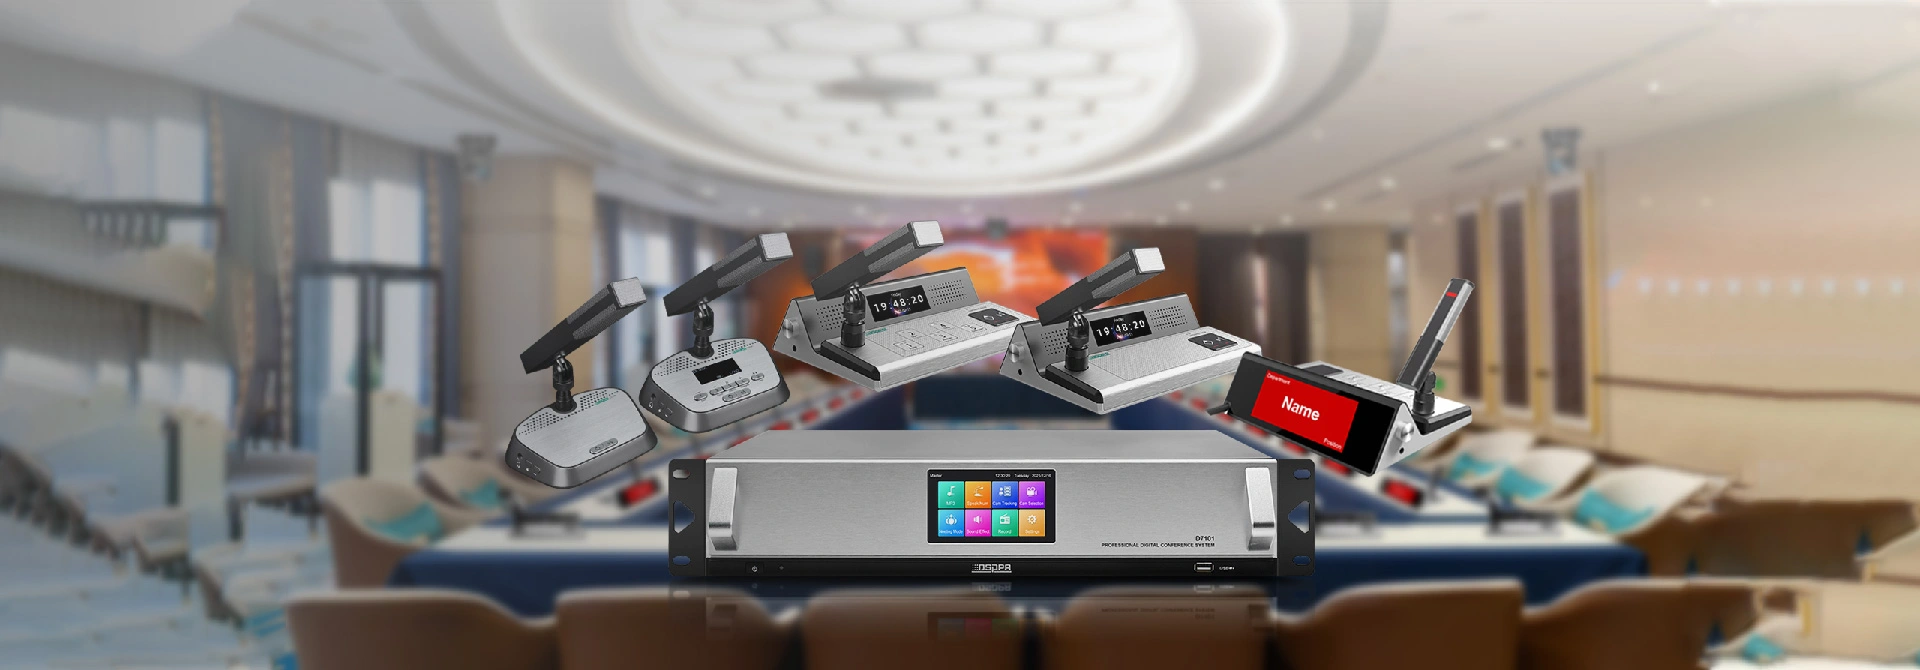 IP Audio Conference System Solution for Medium-Sized Conference Rooms